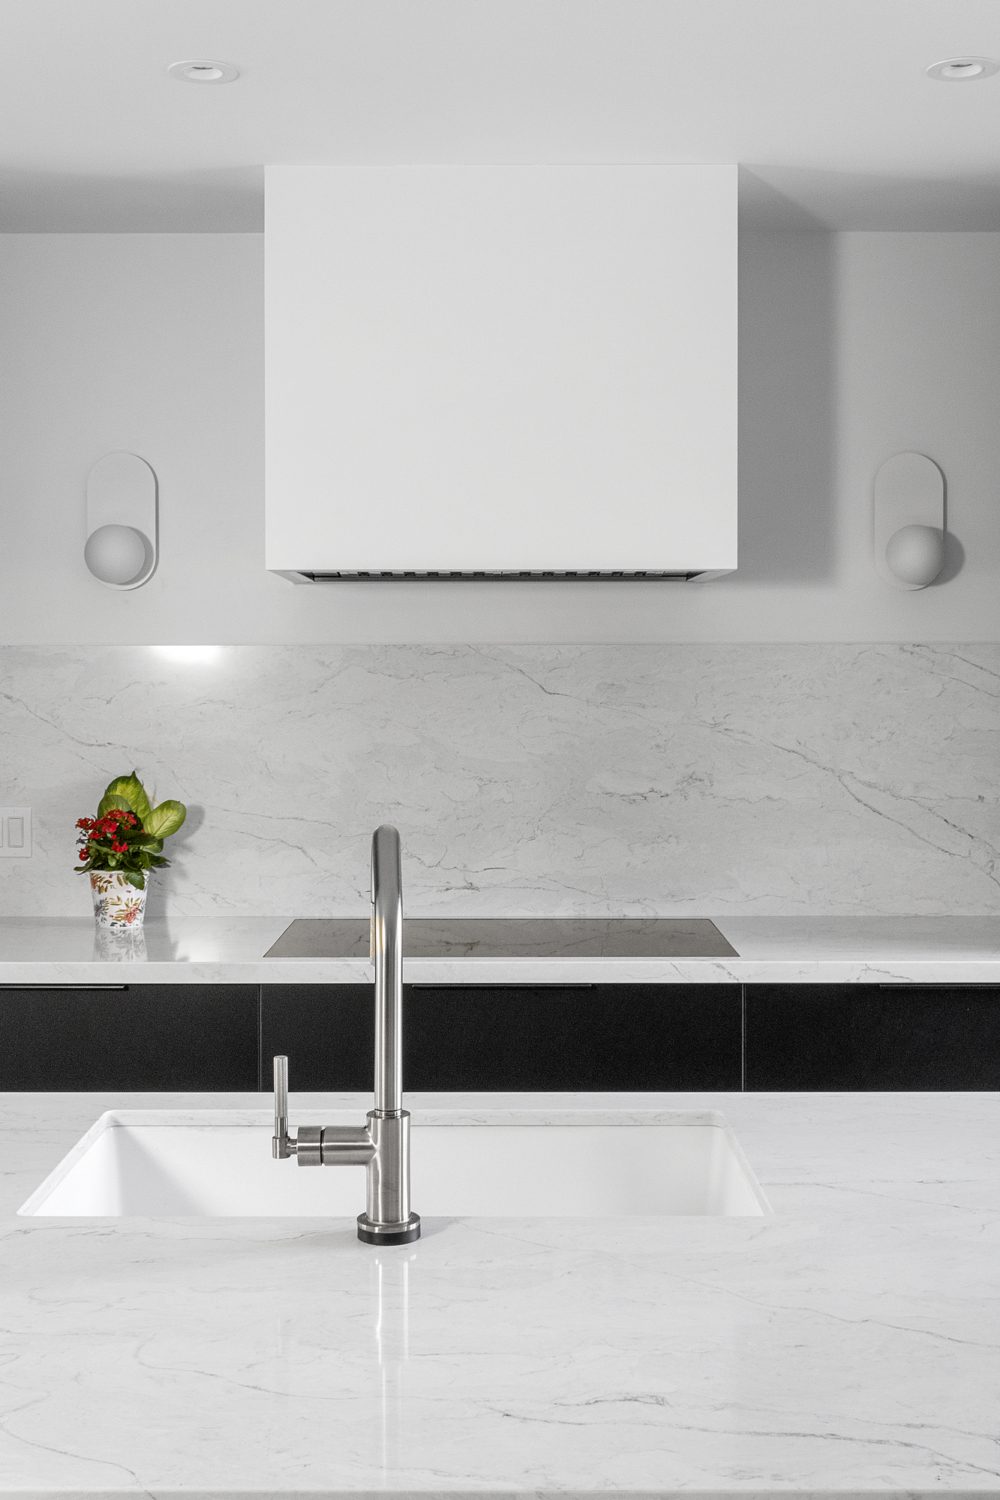 Lawrence Park South, Toronto, Home Renovation, Kitchen, Stainless Steel Faucet